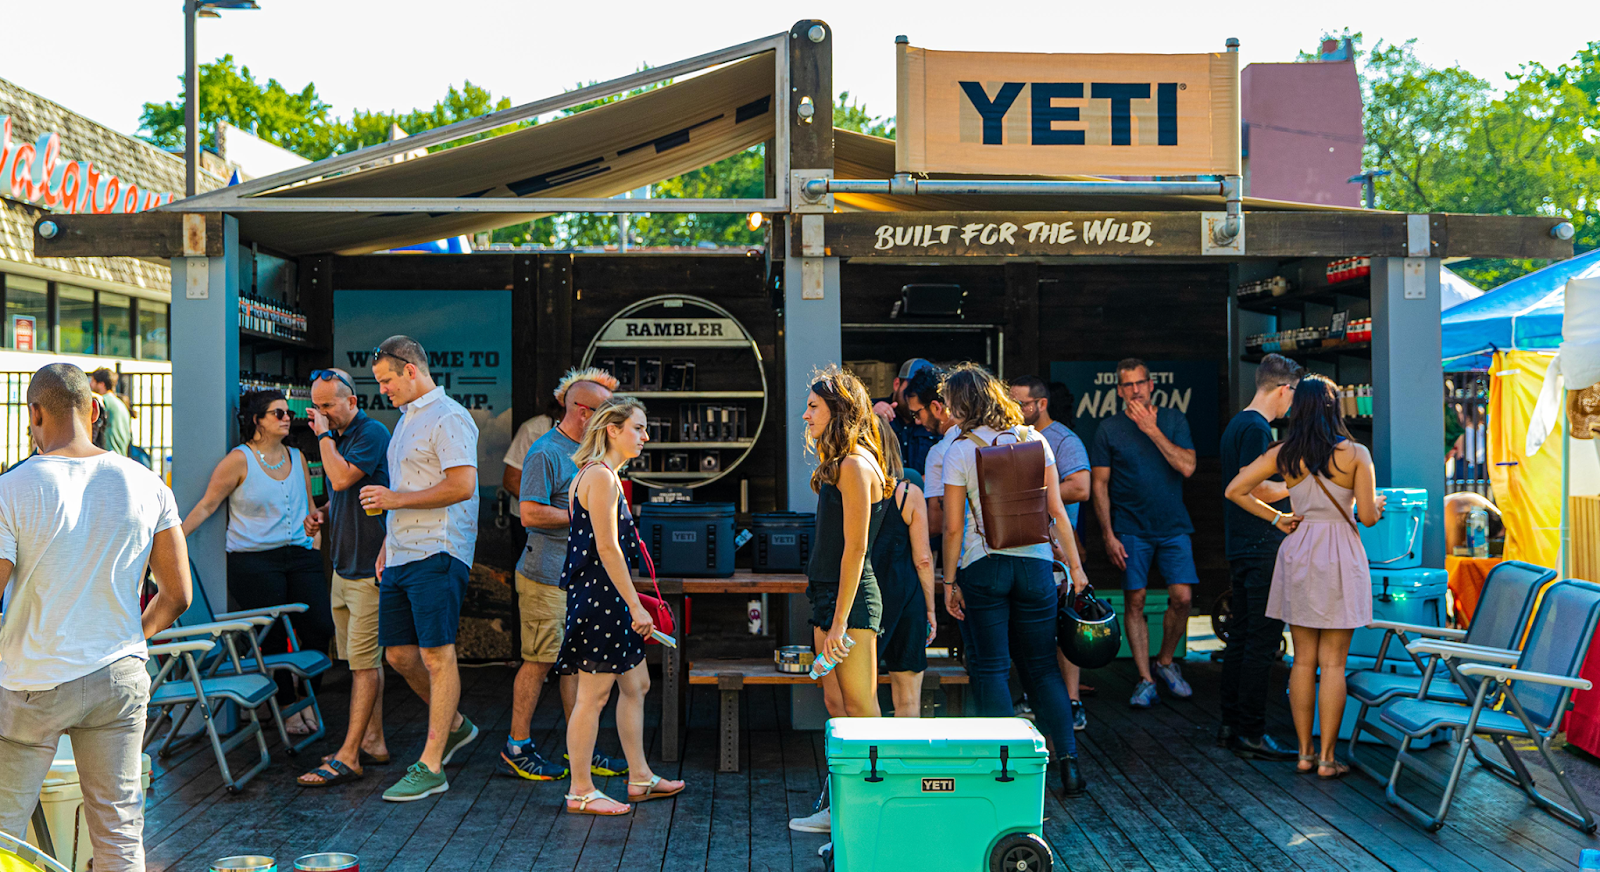 Festival attendees gather at the YETI pop-up event.